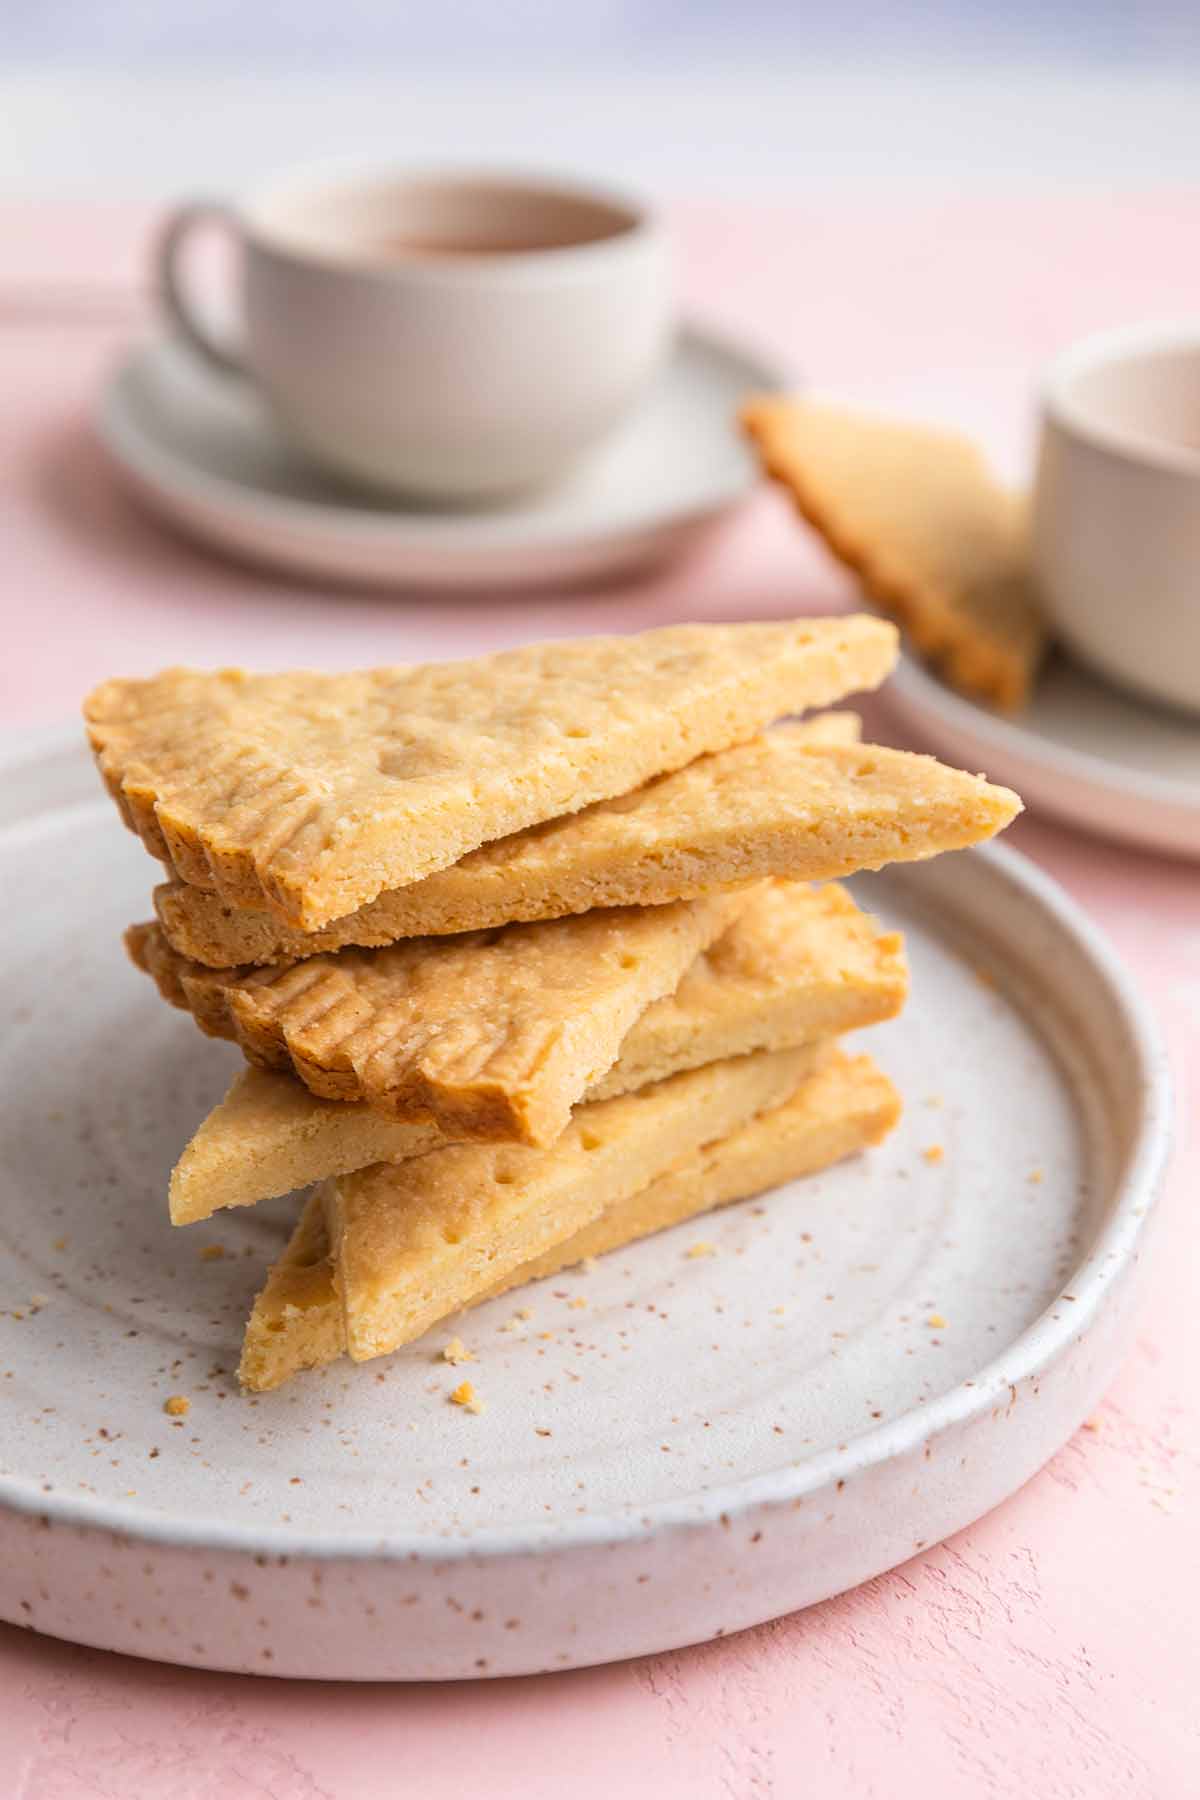 A stack of Scottish shortbread wedges on a plate with cups of tea nearby.